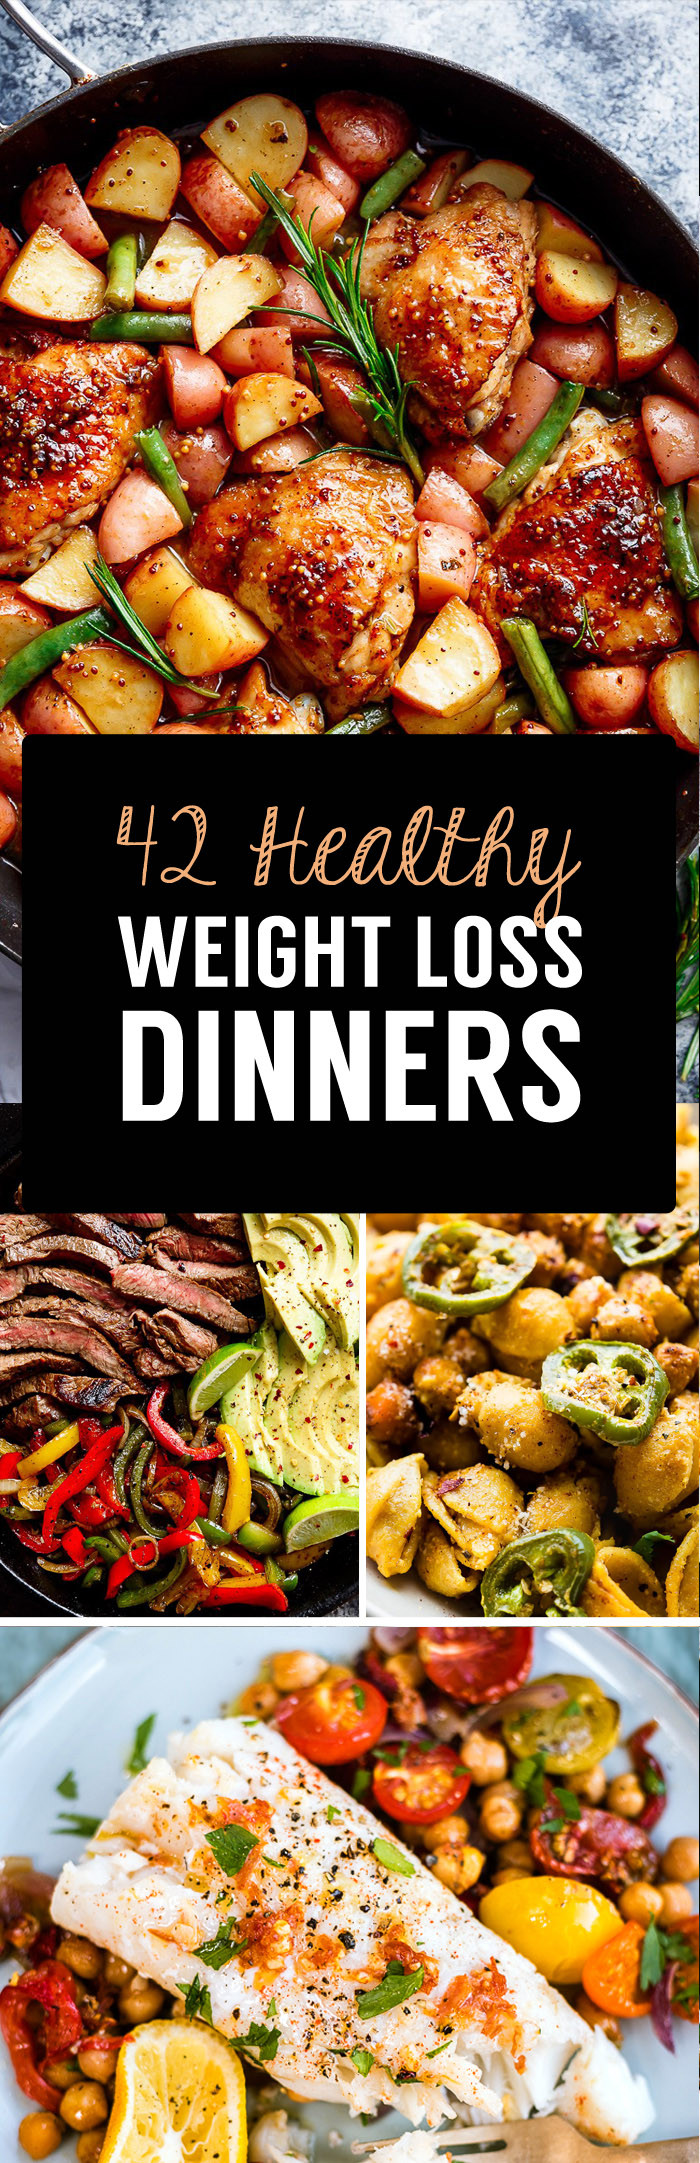 Weight Loss Dinner Recipes
 117 Weight Loss Meal Recipes For Every Time The Day